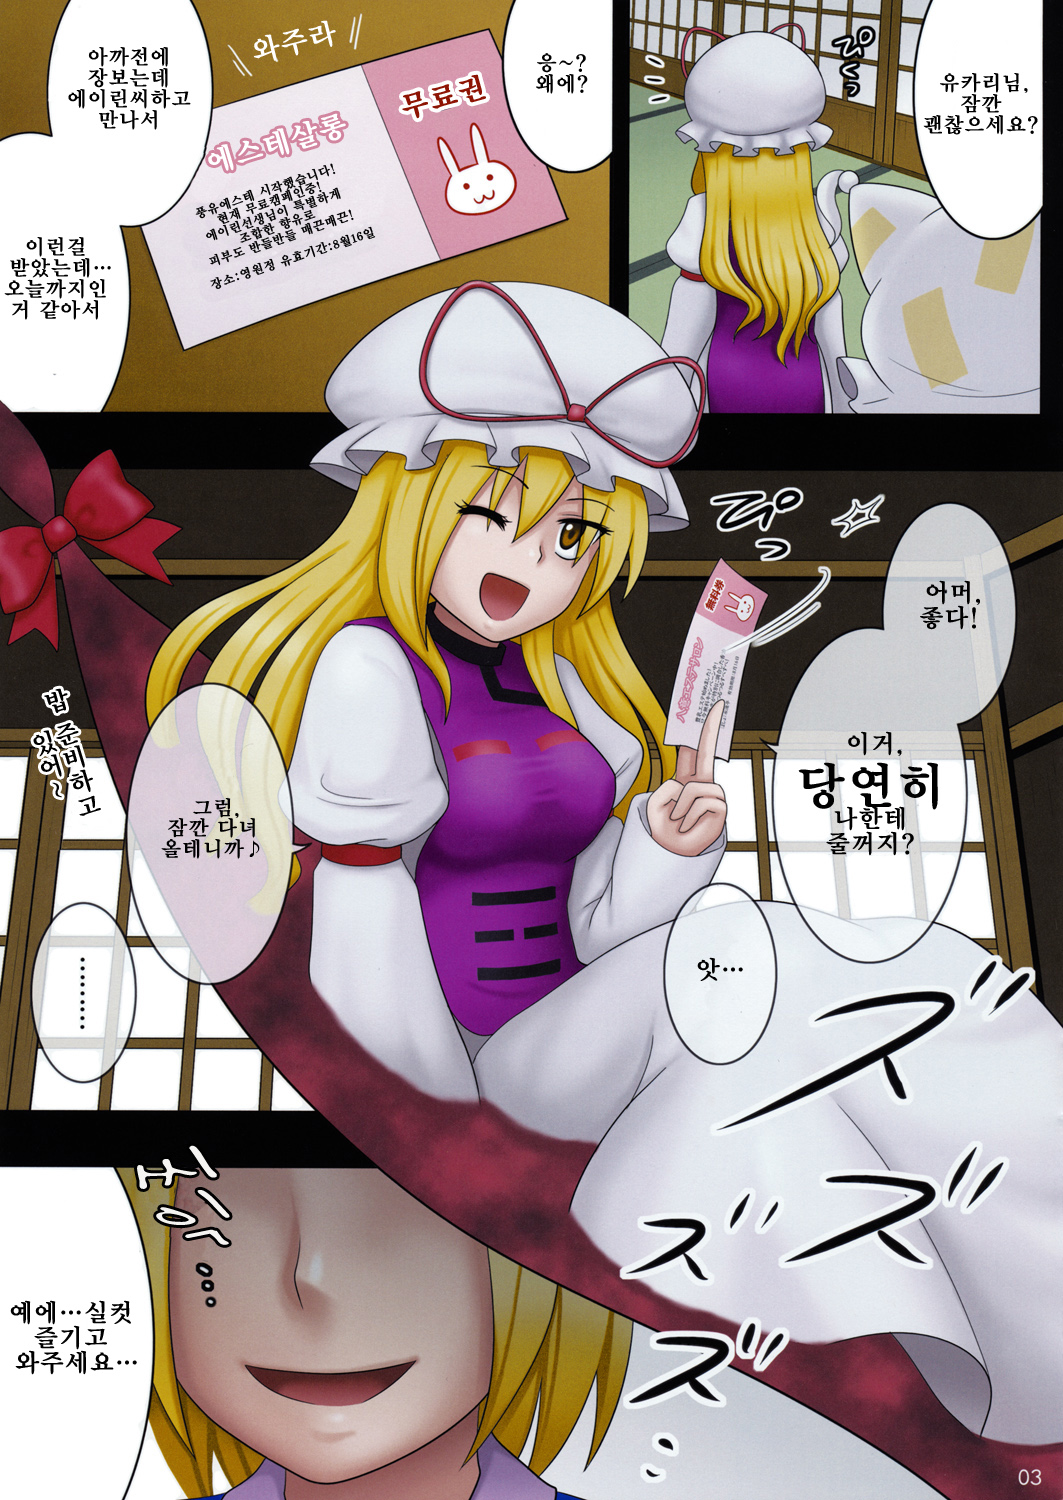 [Syounen Byoukan] Touhou Catfight (Korean) [少年病監] 東方キャットファイト [韓国翻訳]